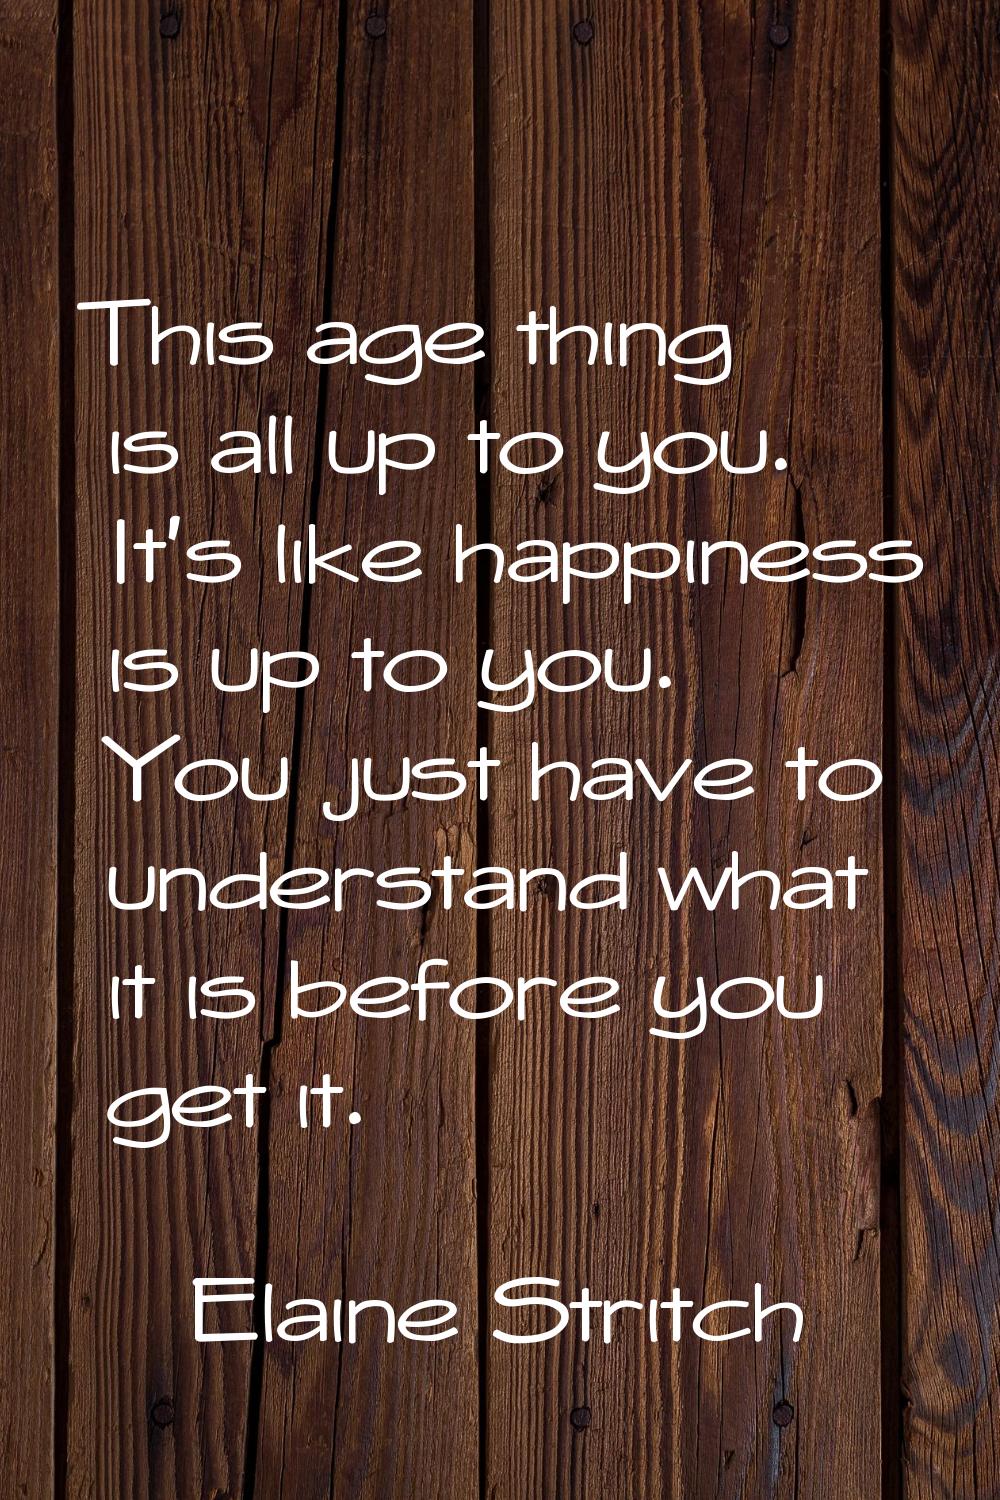 This age thing is all up to you. It's like happiness is up to you. You just have to understand what